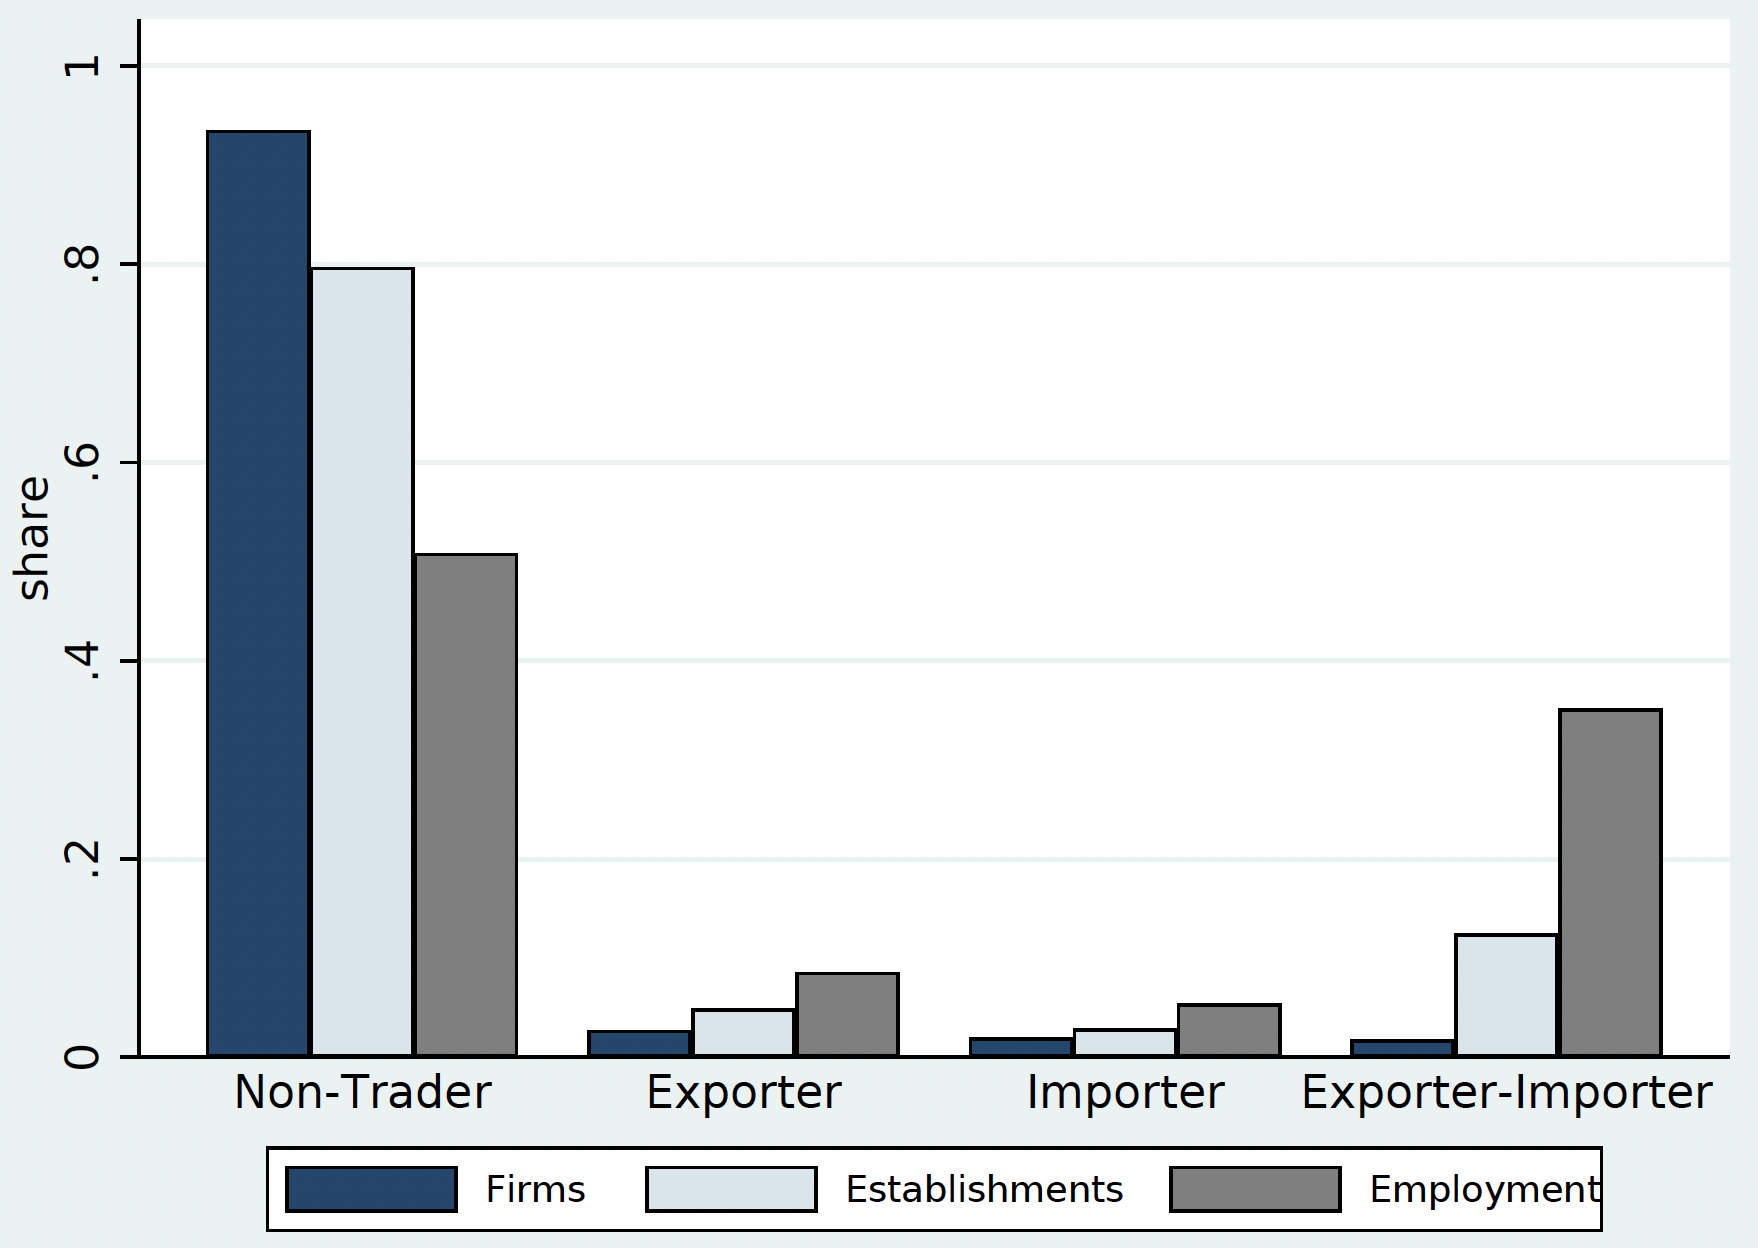 The rise of exporters and importers in US job growth 2